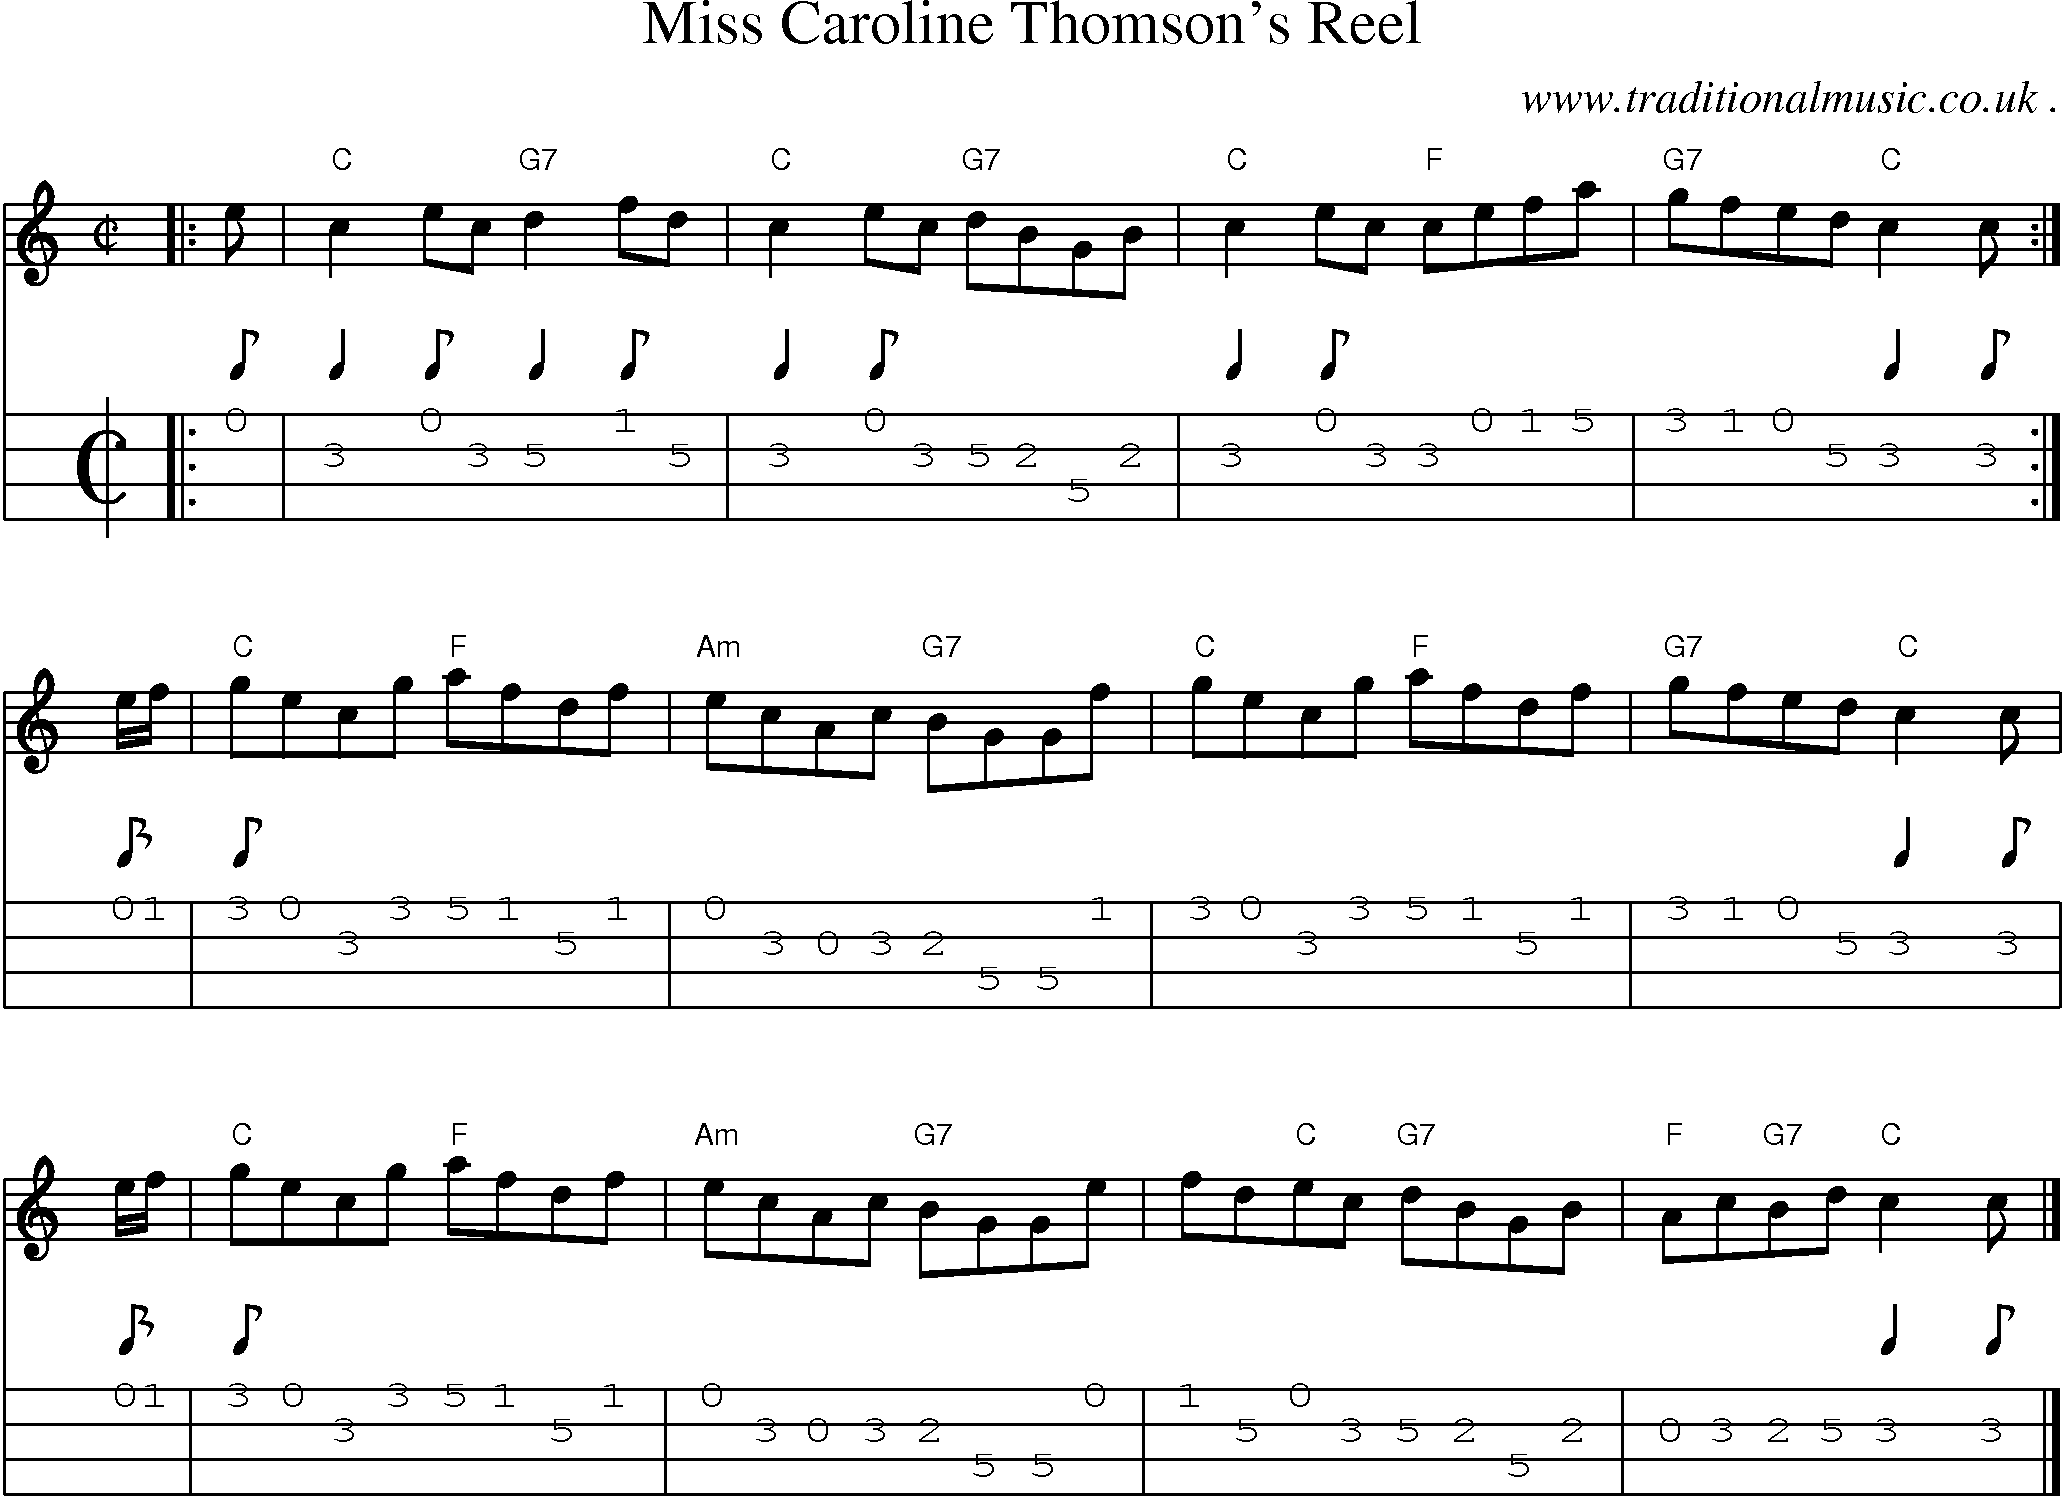 Sheet-music  score, Chords and Mandolin Tabs for Miss Caroline Thomsons Reel